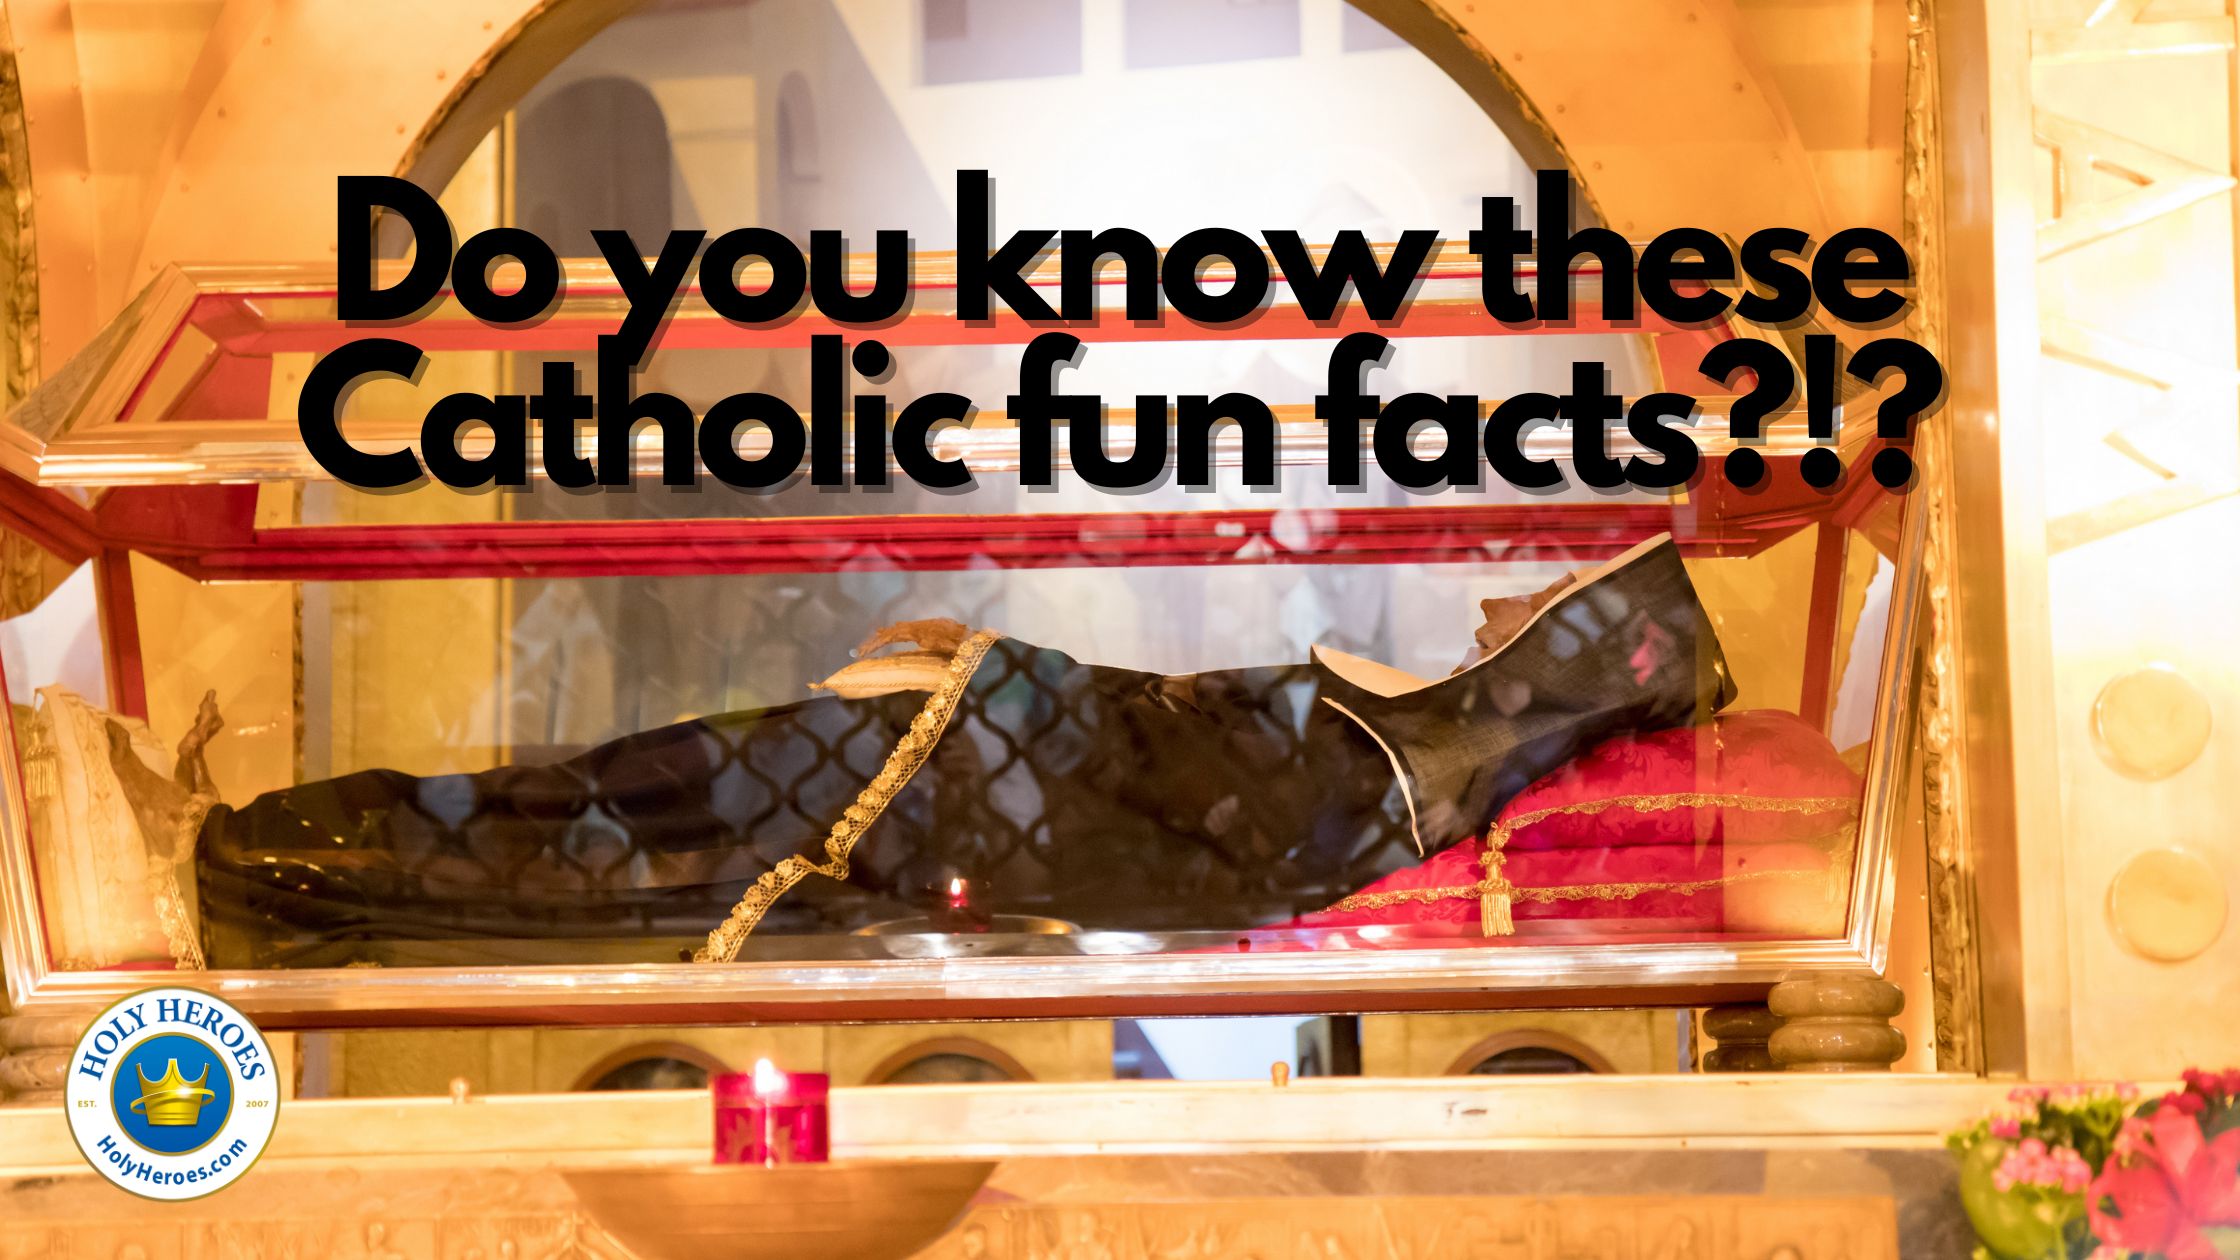 Do you know these Catholic fun facts?!?